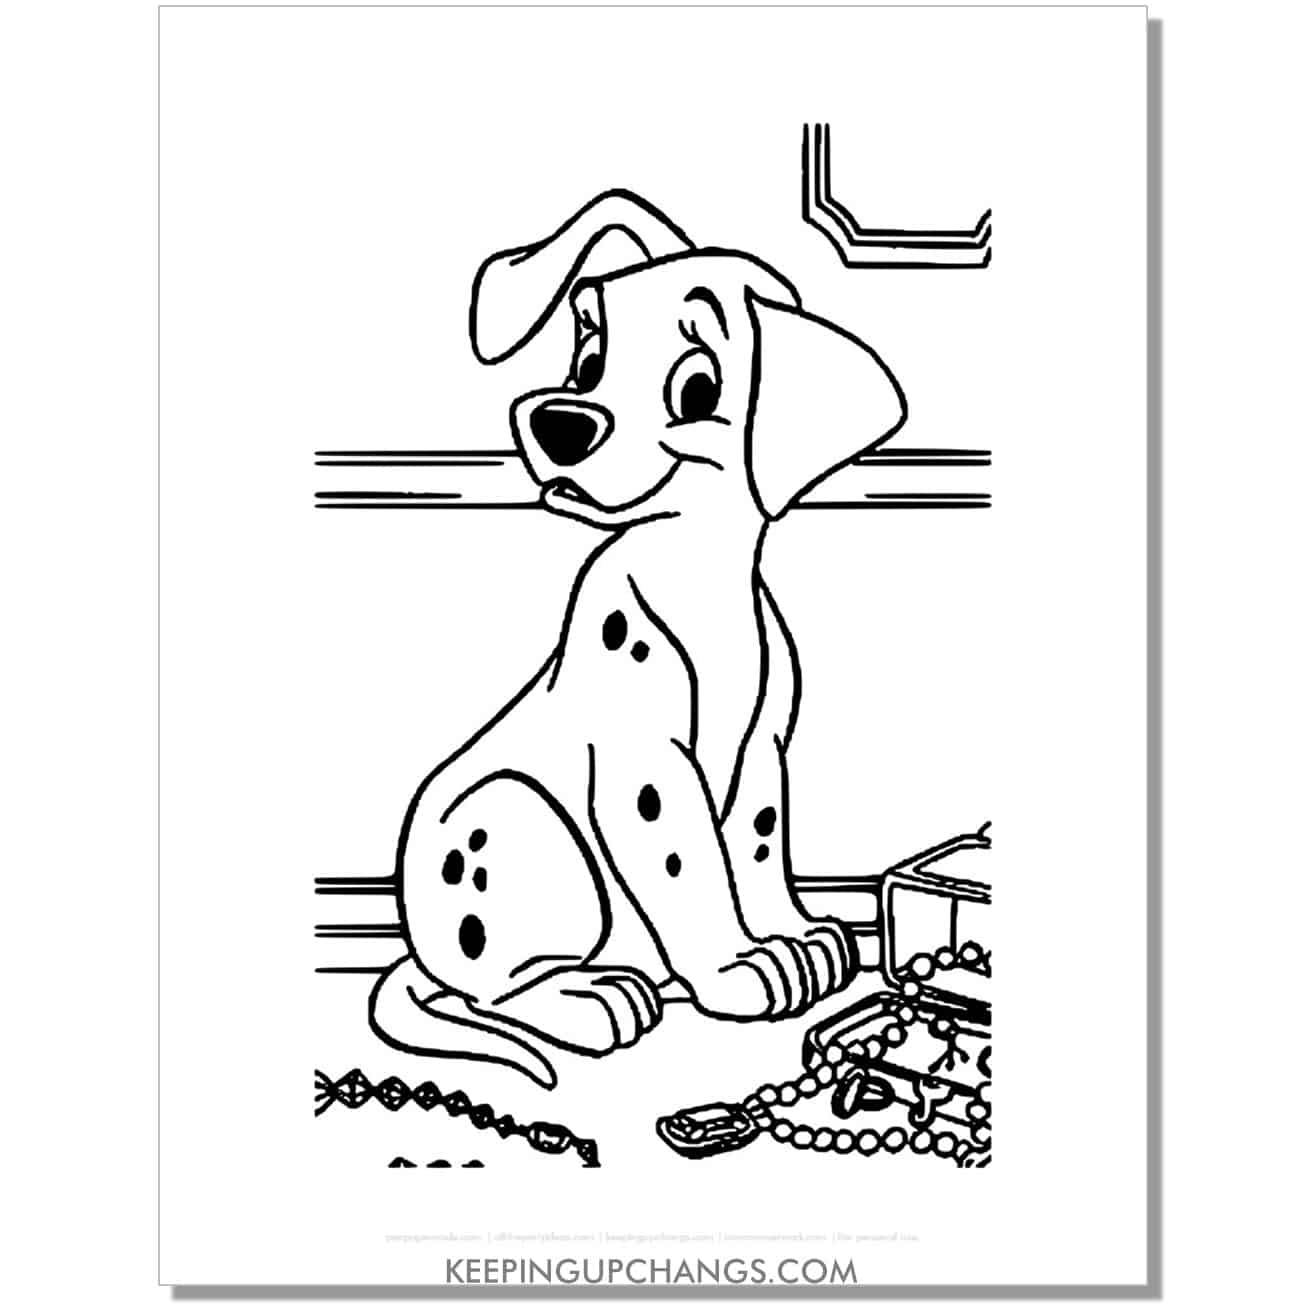 free penny playing in jewelry 101 dalmations coloring page, sheet.